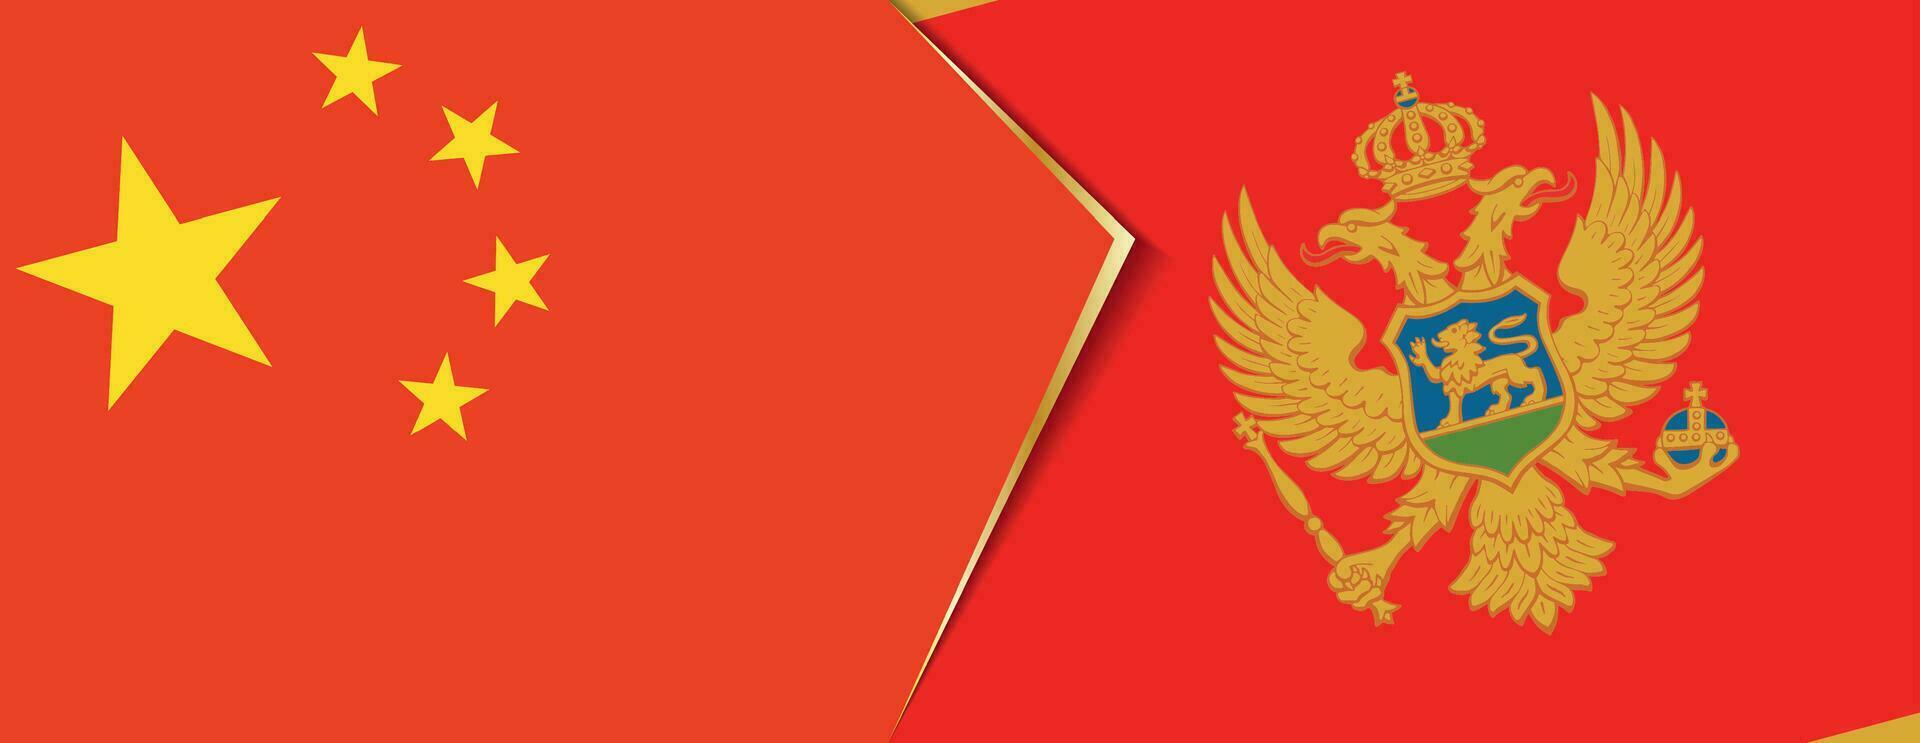 China and Montenegro flags, two vector flags.